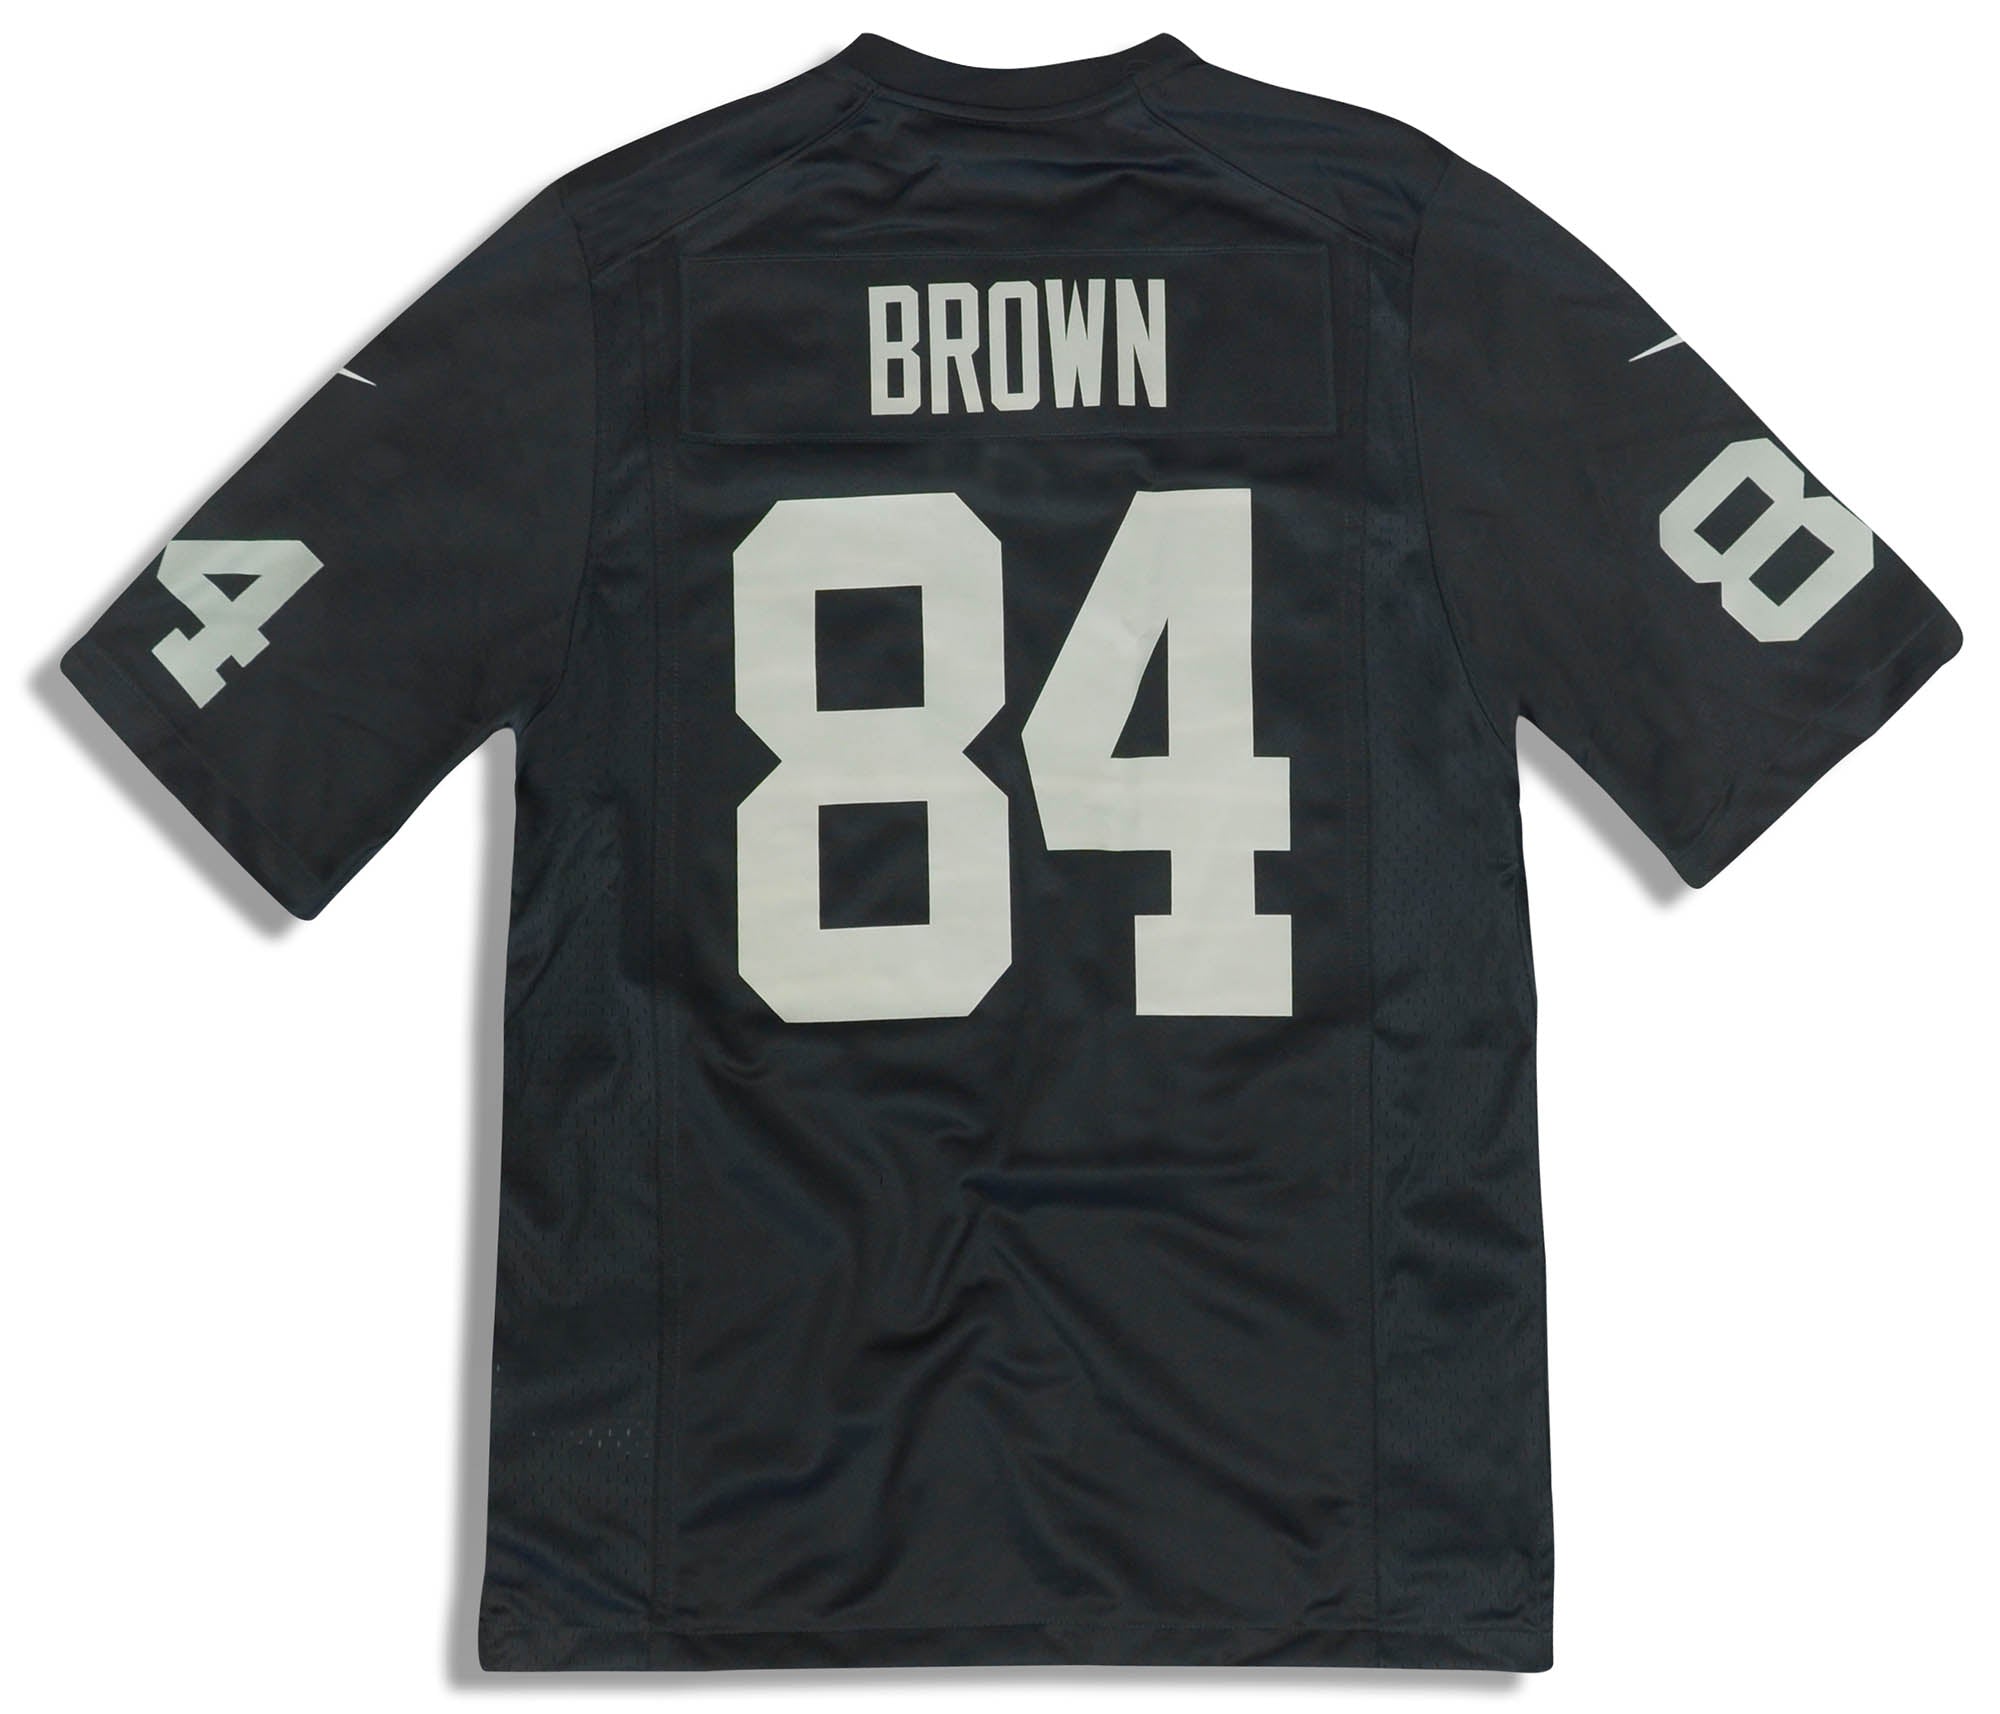 2019 OAKLAND RAIDERS BROWN #84 NIKE GAME JERSEY (HOME) S - *AS NEW*